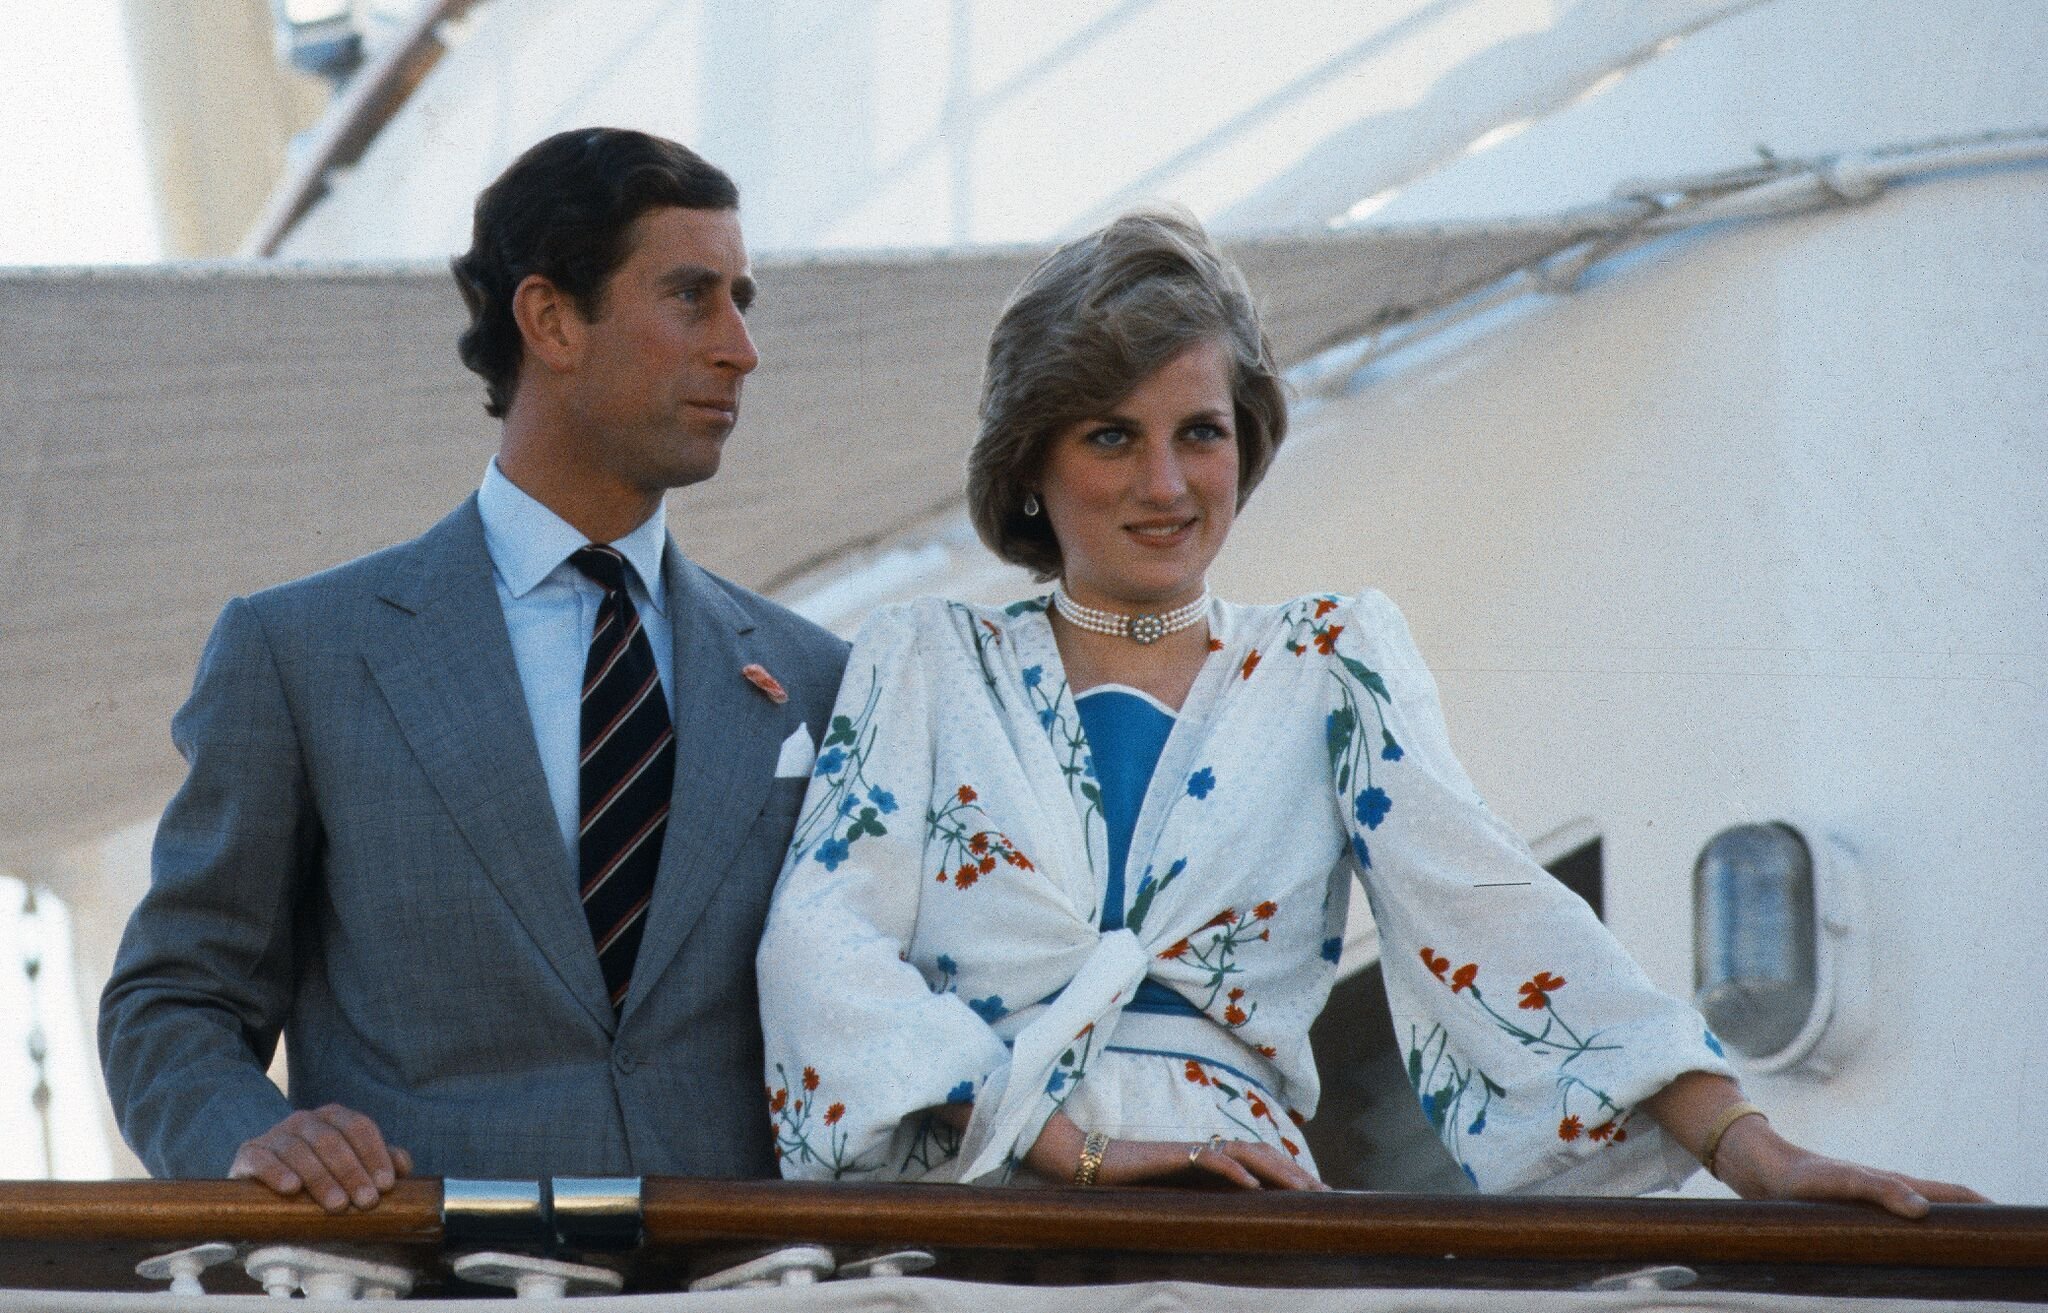  Diana, Princess of Wales and Prince Charles, Prince of Wales stand on the deck of the Royal Yacht Britannia at the start of their honeymoon  | Getty Images